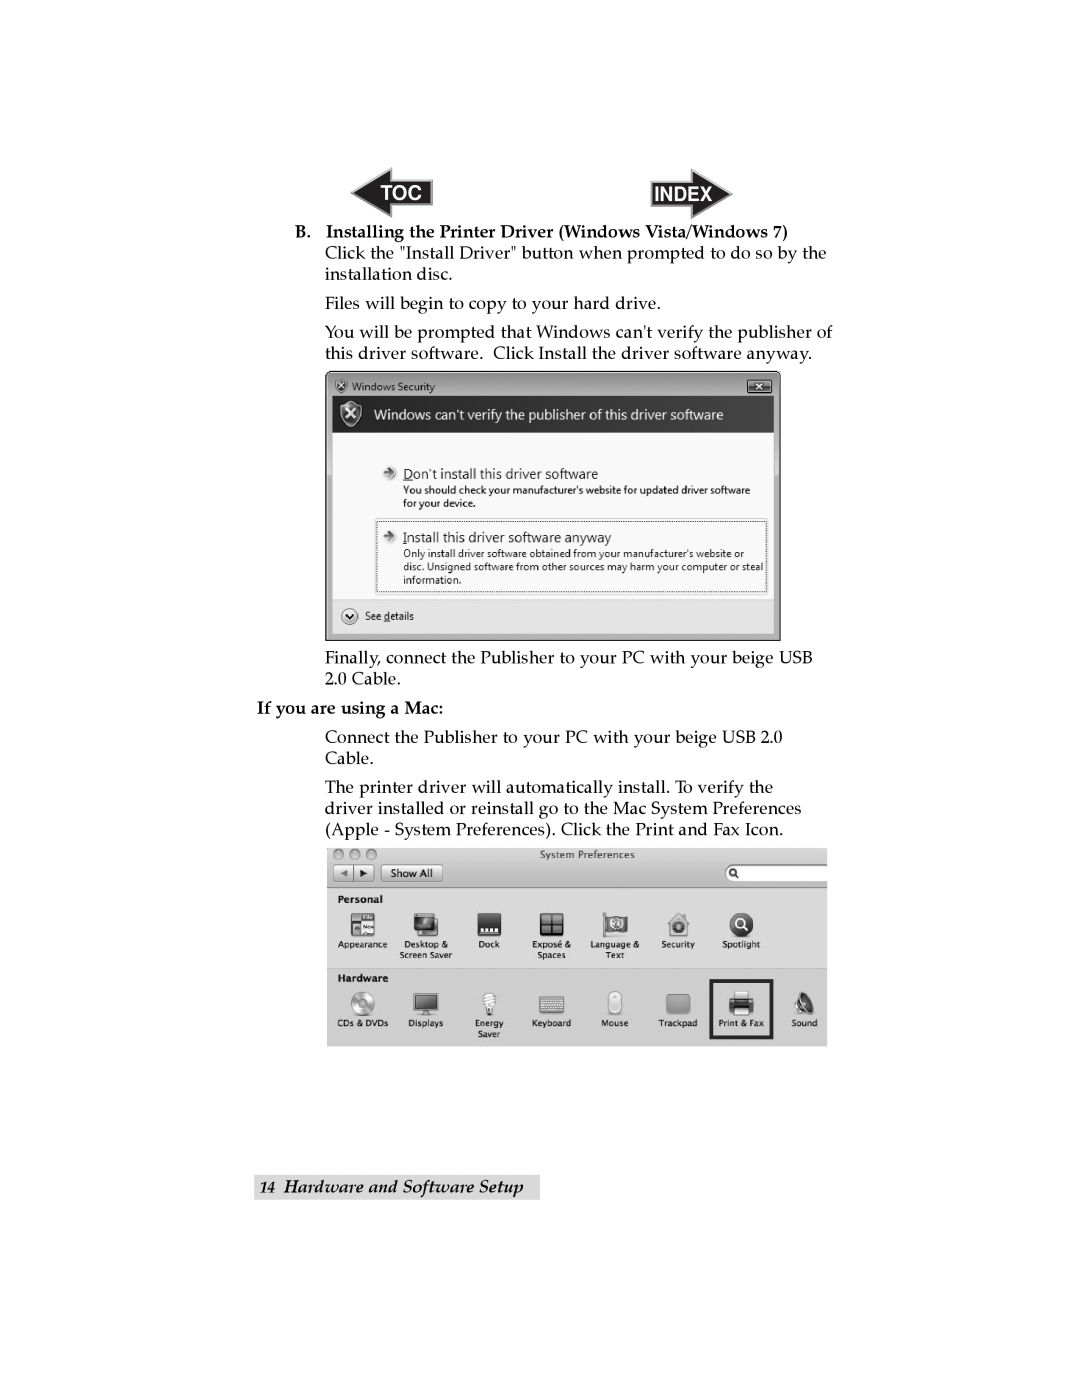 Primera Technology 032910-511262 user manual If you are using a Mac, Hardware and Software Setup, Index 